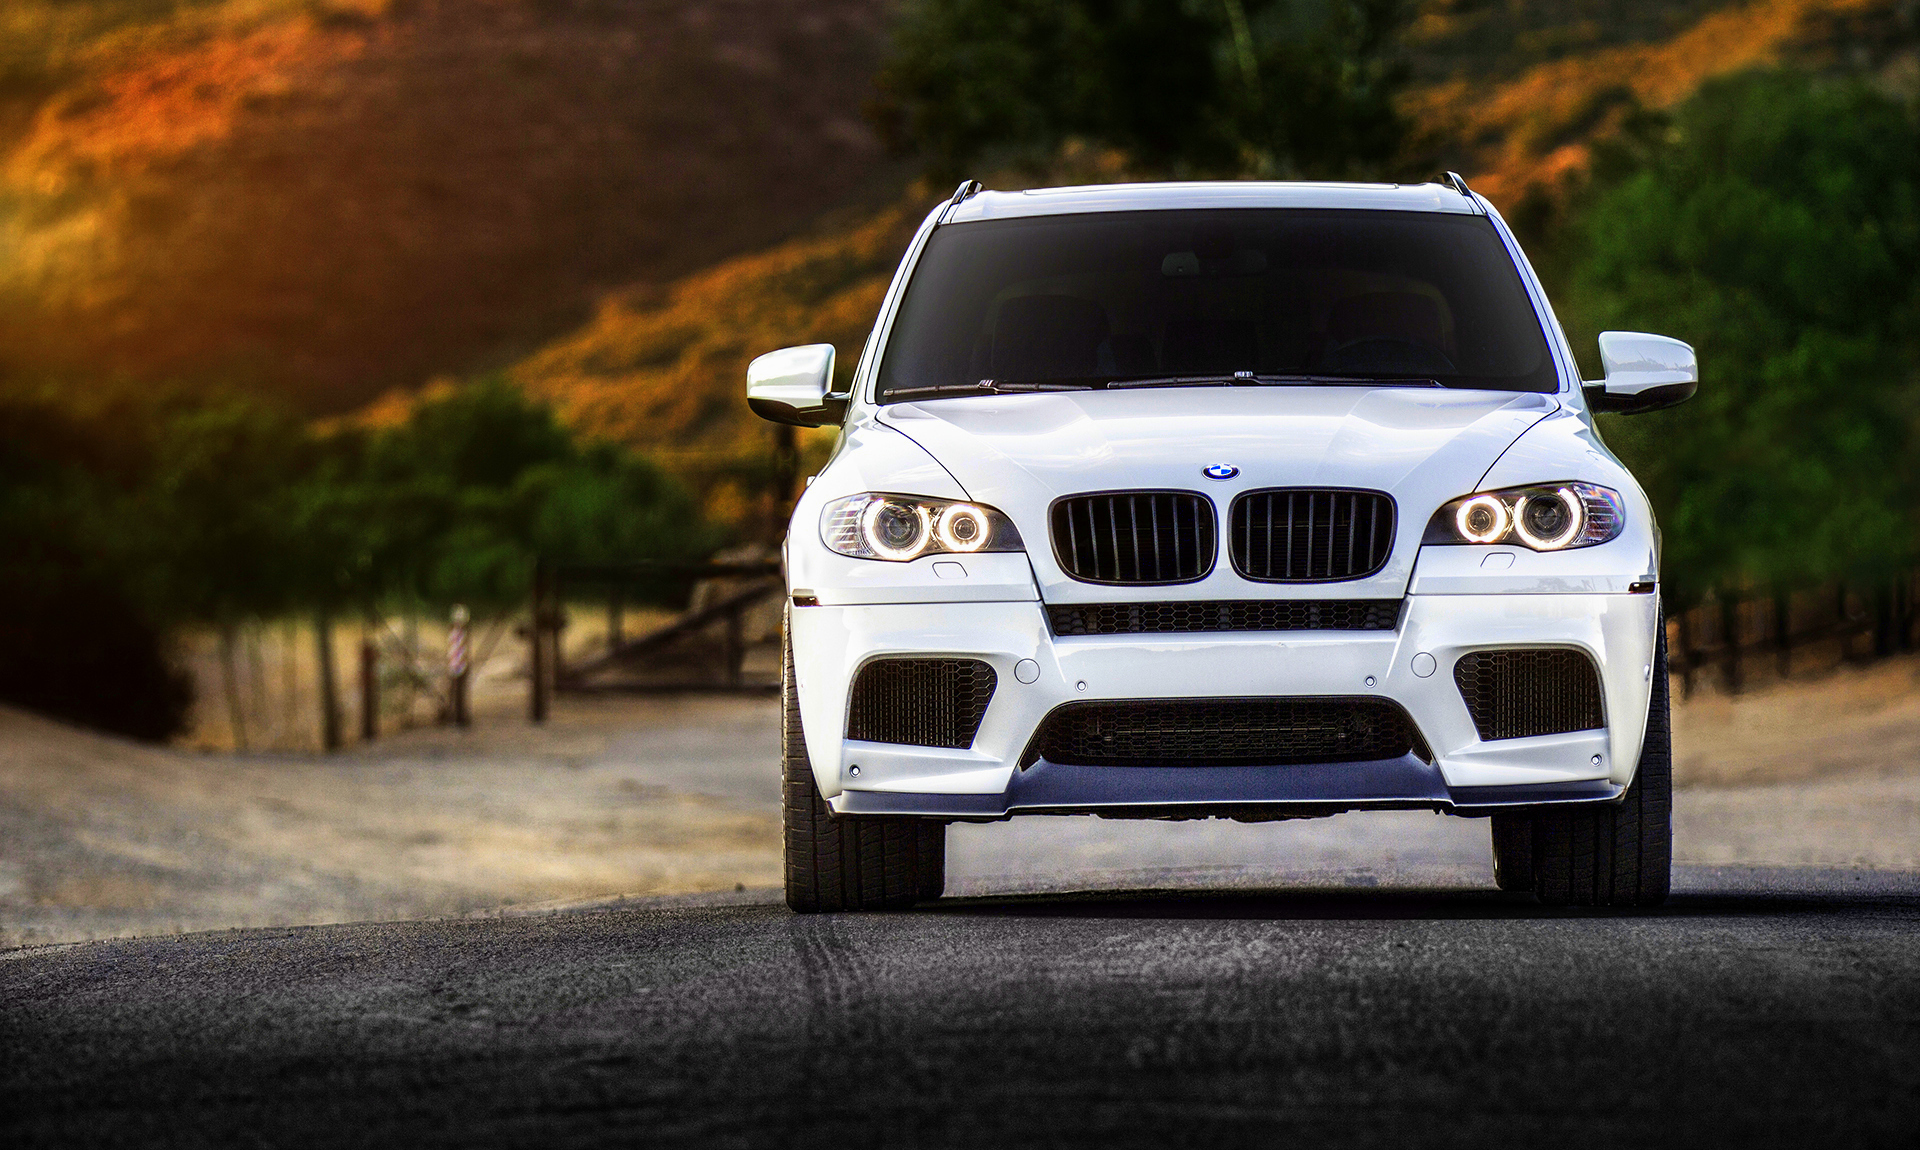 tuning, x5m, front view, cars New Lock Screen Backgrounds